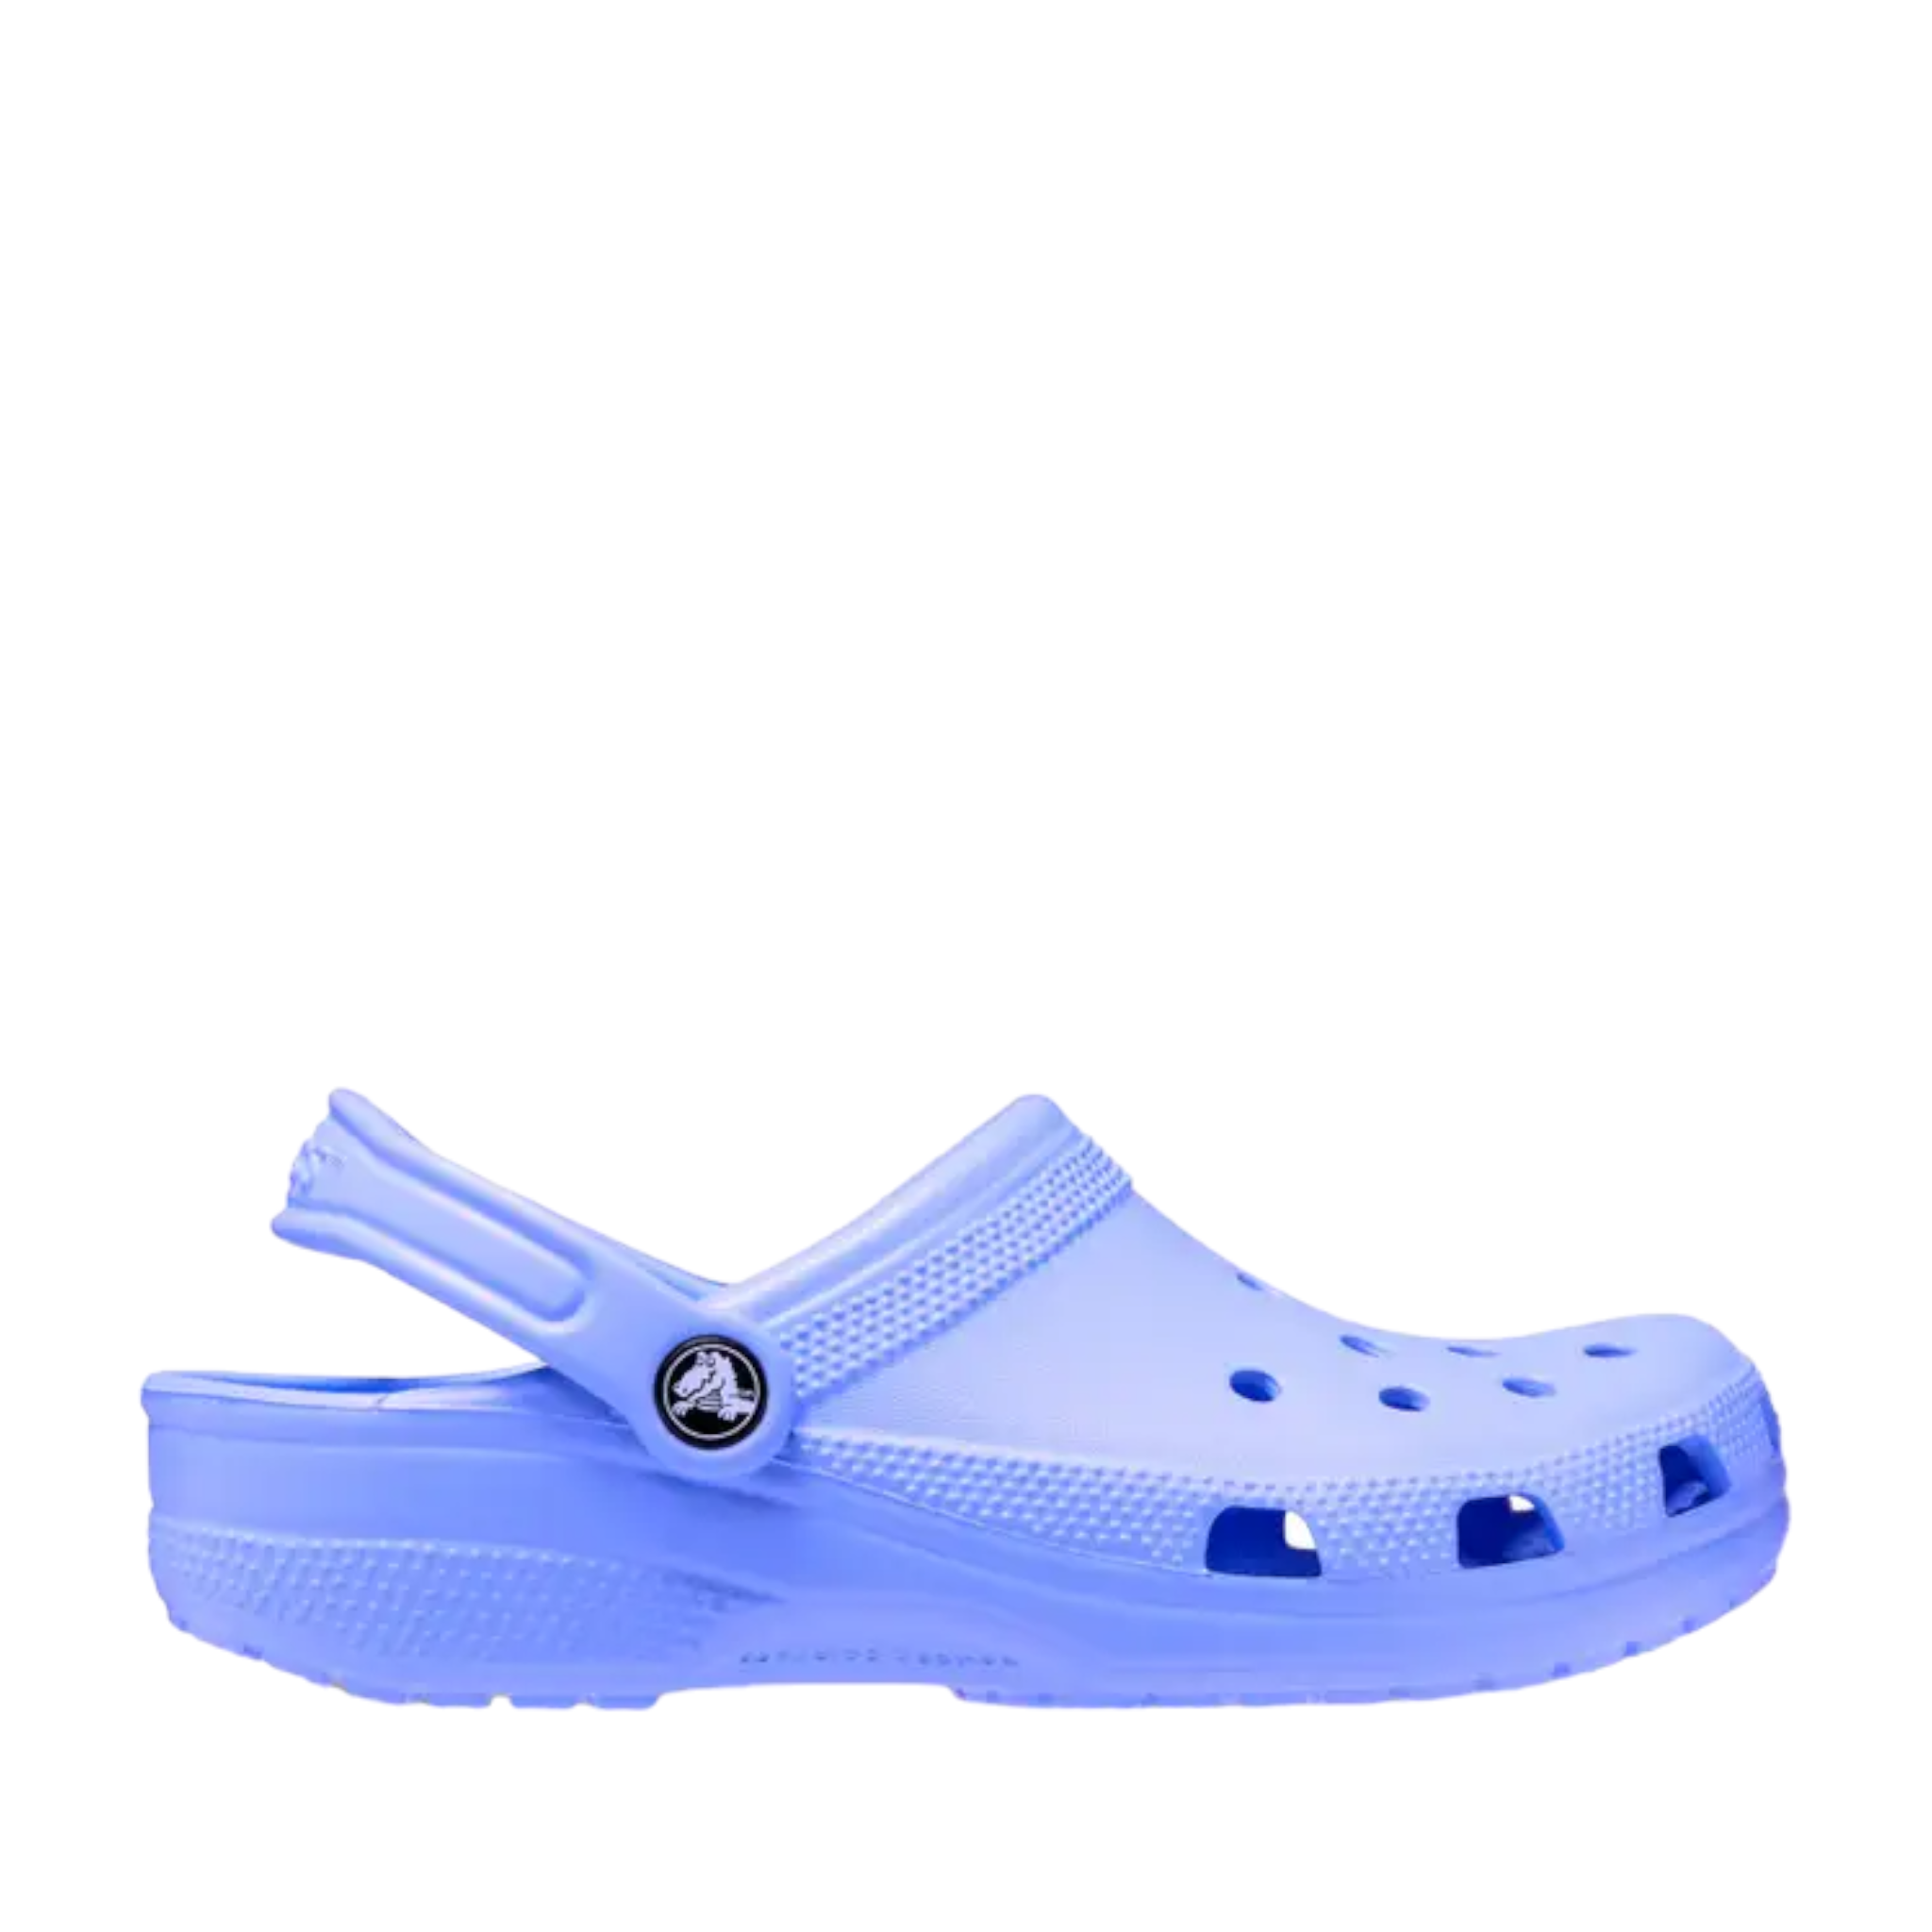 Crocs Classic Clogs online and instore with shoe&amp;me Mount Maunganui. Shop Moon Jelly Clogs